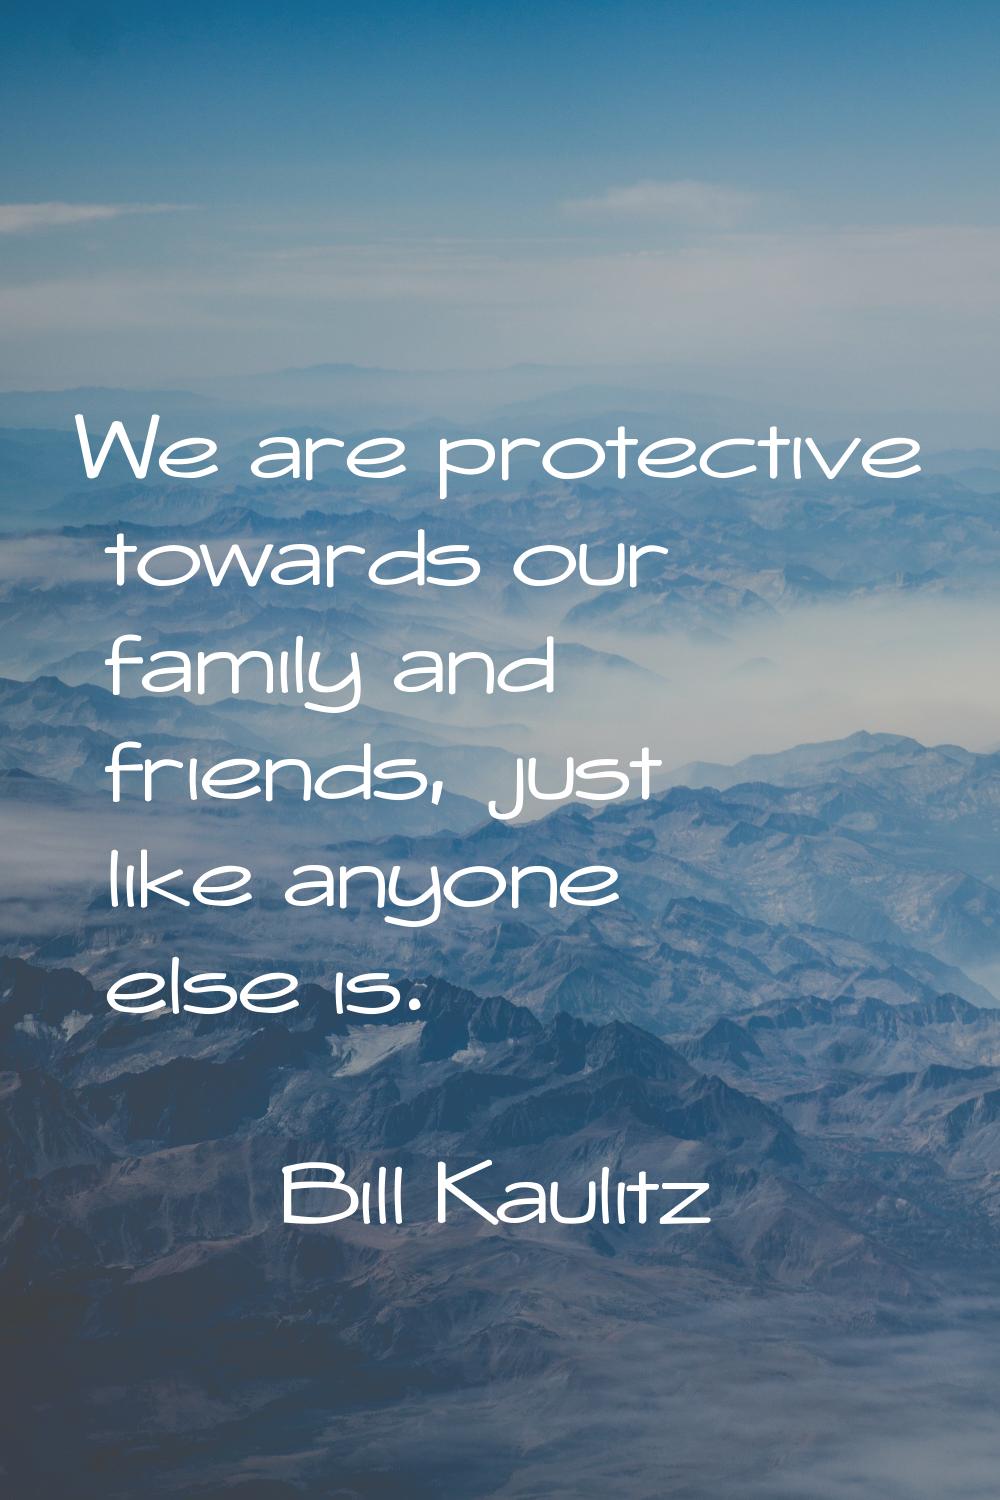 We are protective towards our family and friends, just like anyone else is.